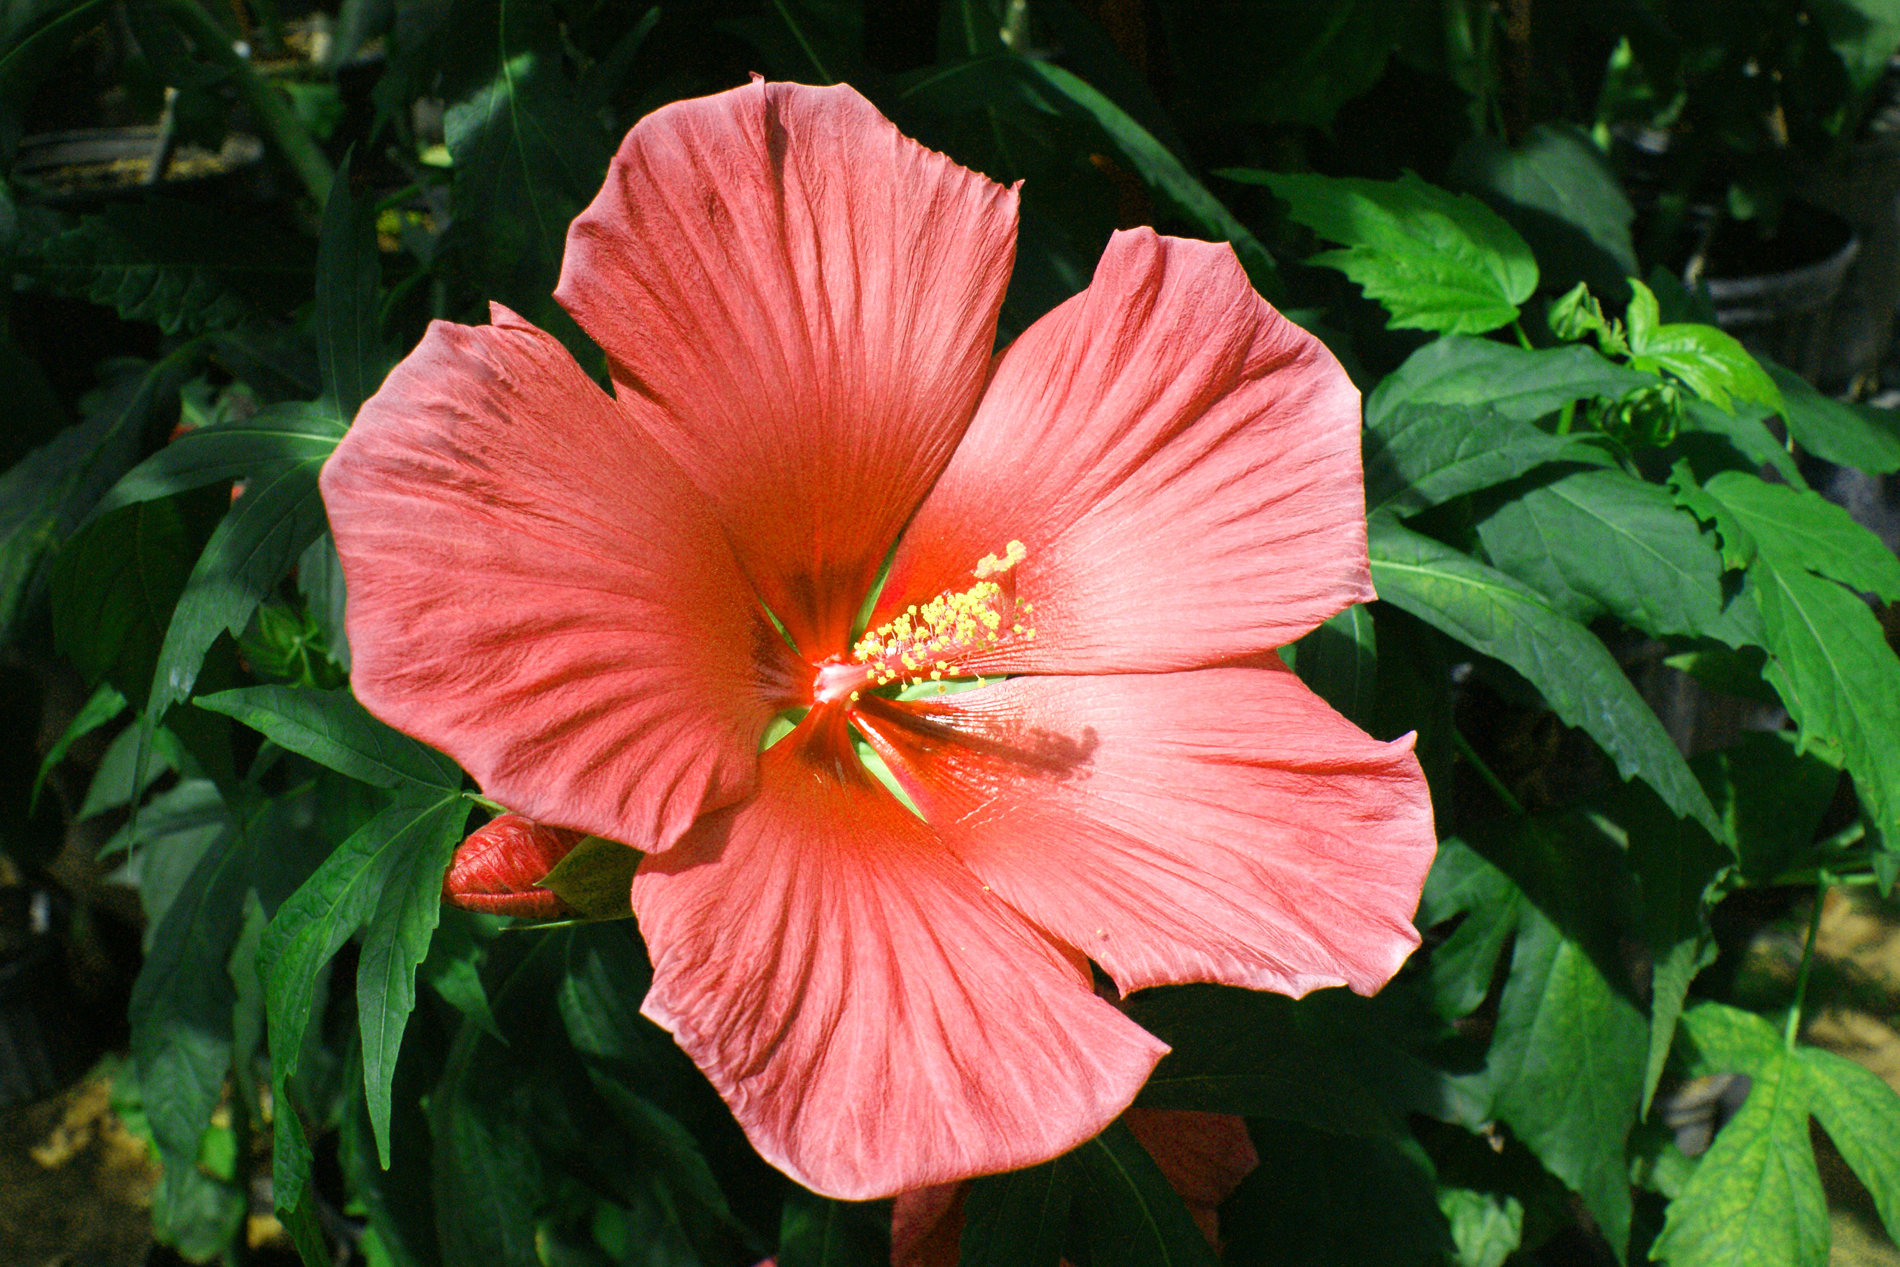 180 Ways To Create Novel Hibiscus With Unusual Colors And Shapes Research Texas A M Inform Inspire Amaze